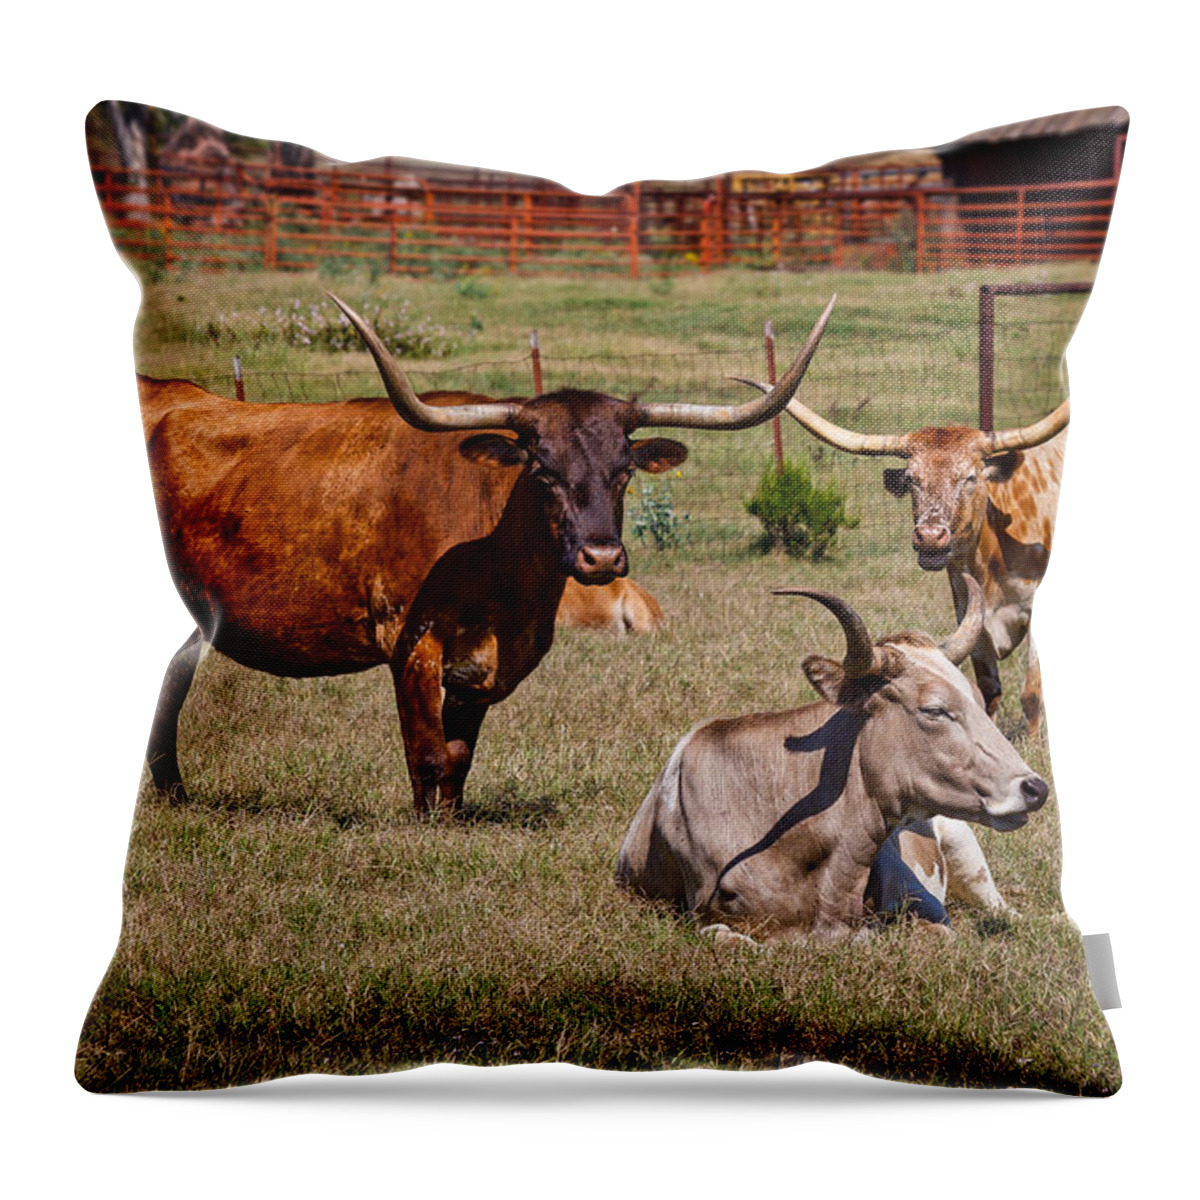 Afternoon Throw Pillow featuring the photograph Three Amigos by Doug Long